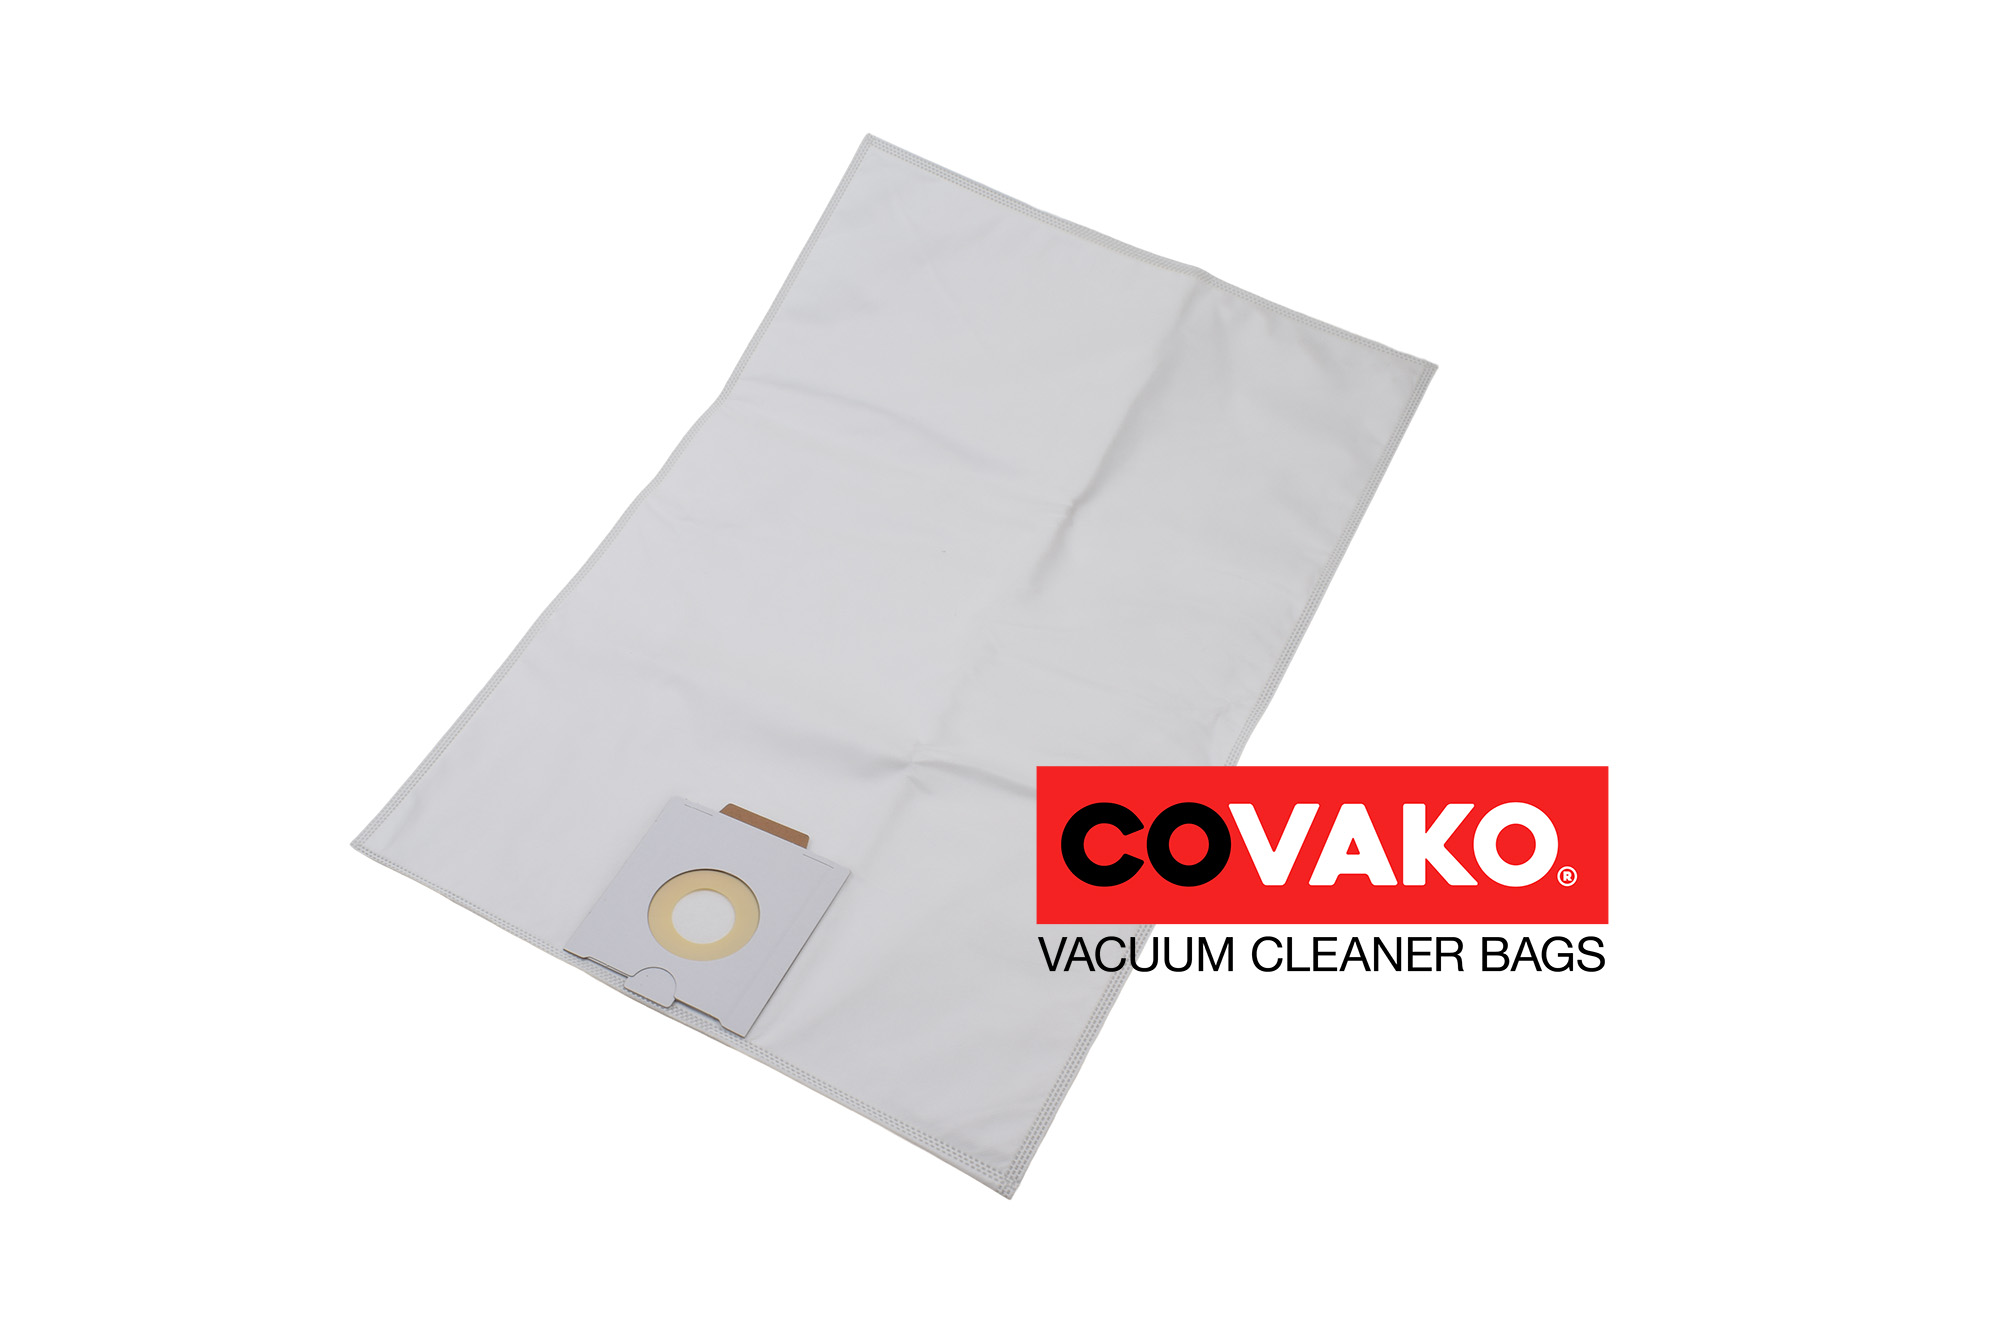 Protool VCP 260 E-L / Synthesis - Protool vacuum cleaner bags